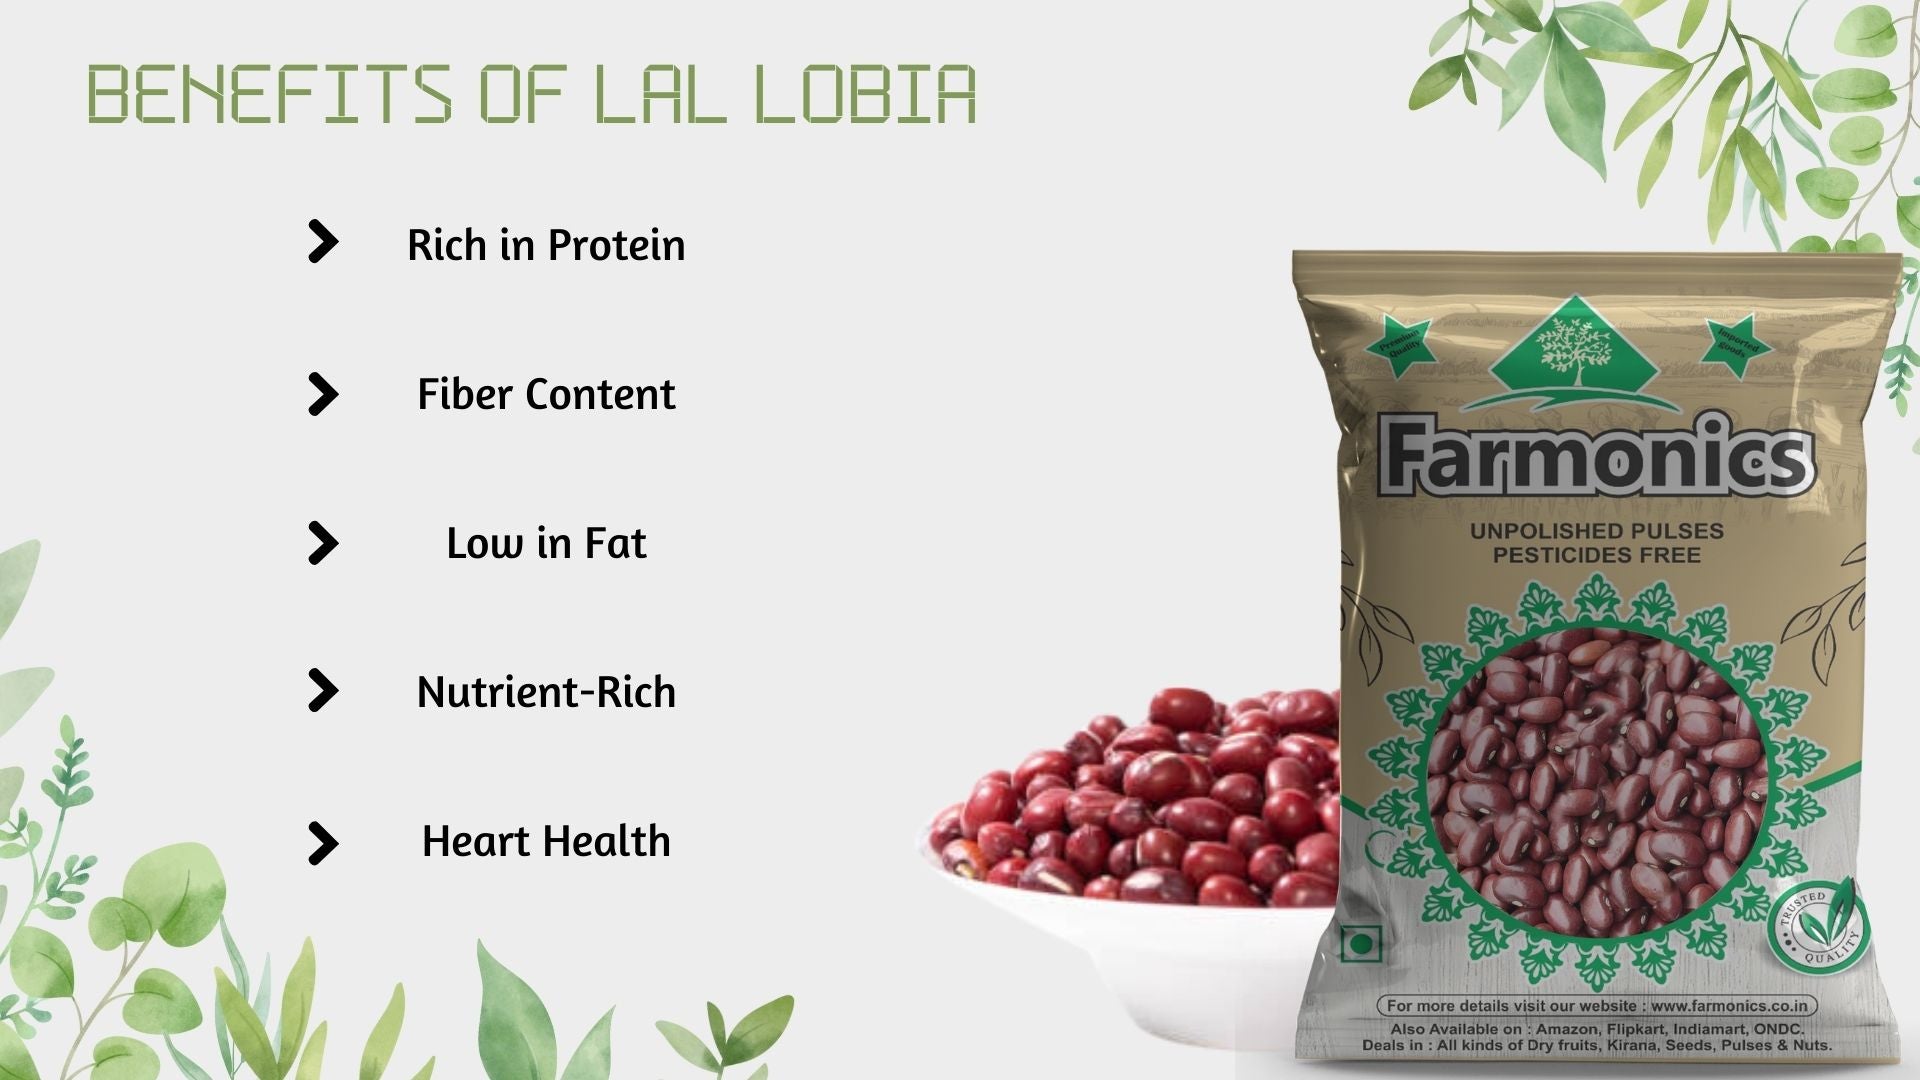 here are some of the benefits of lal lobia